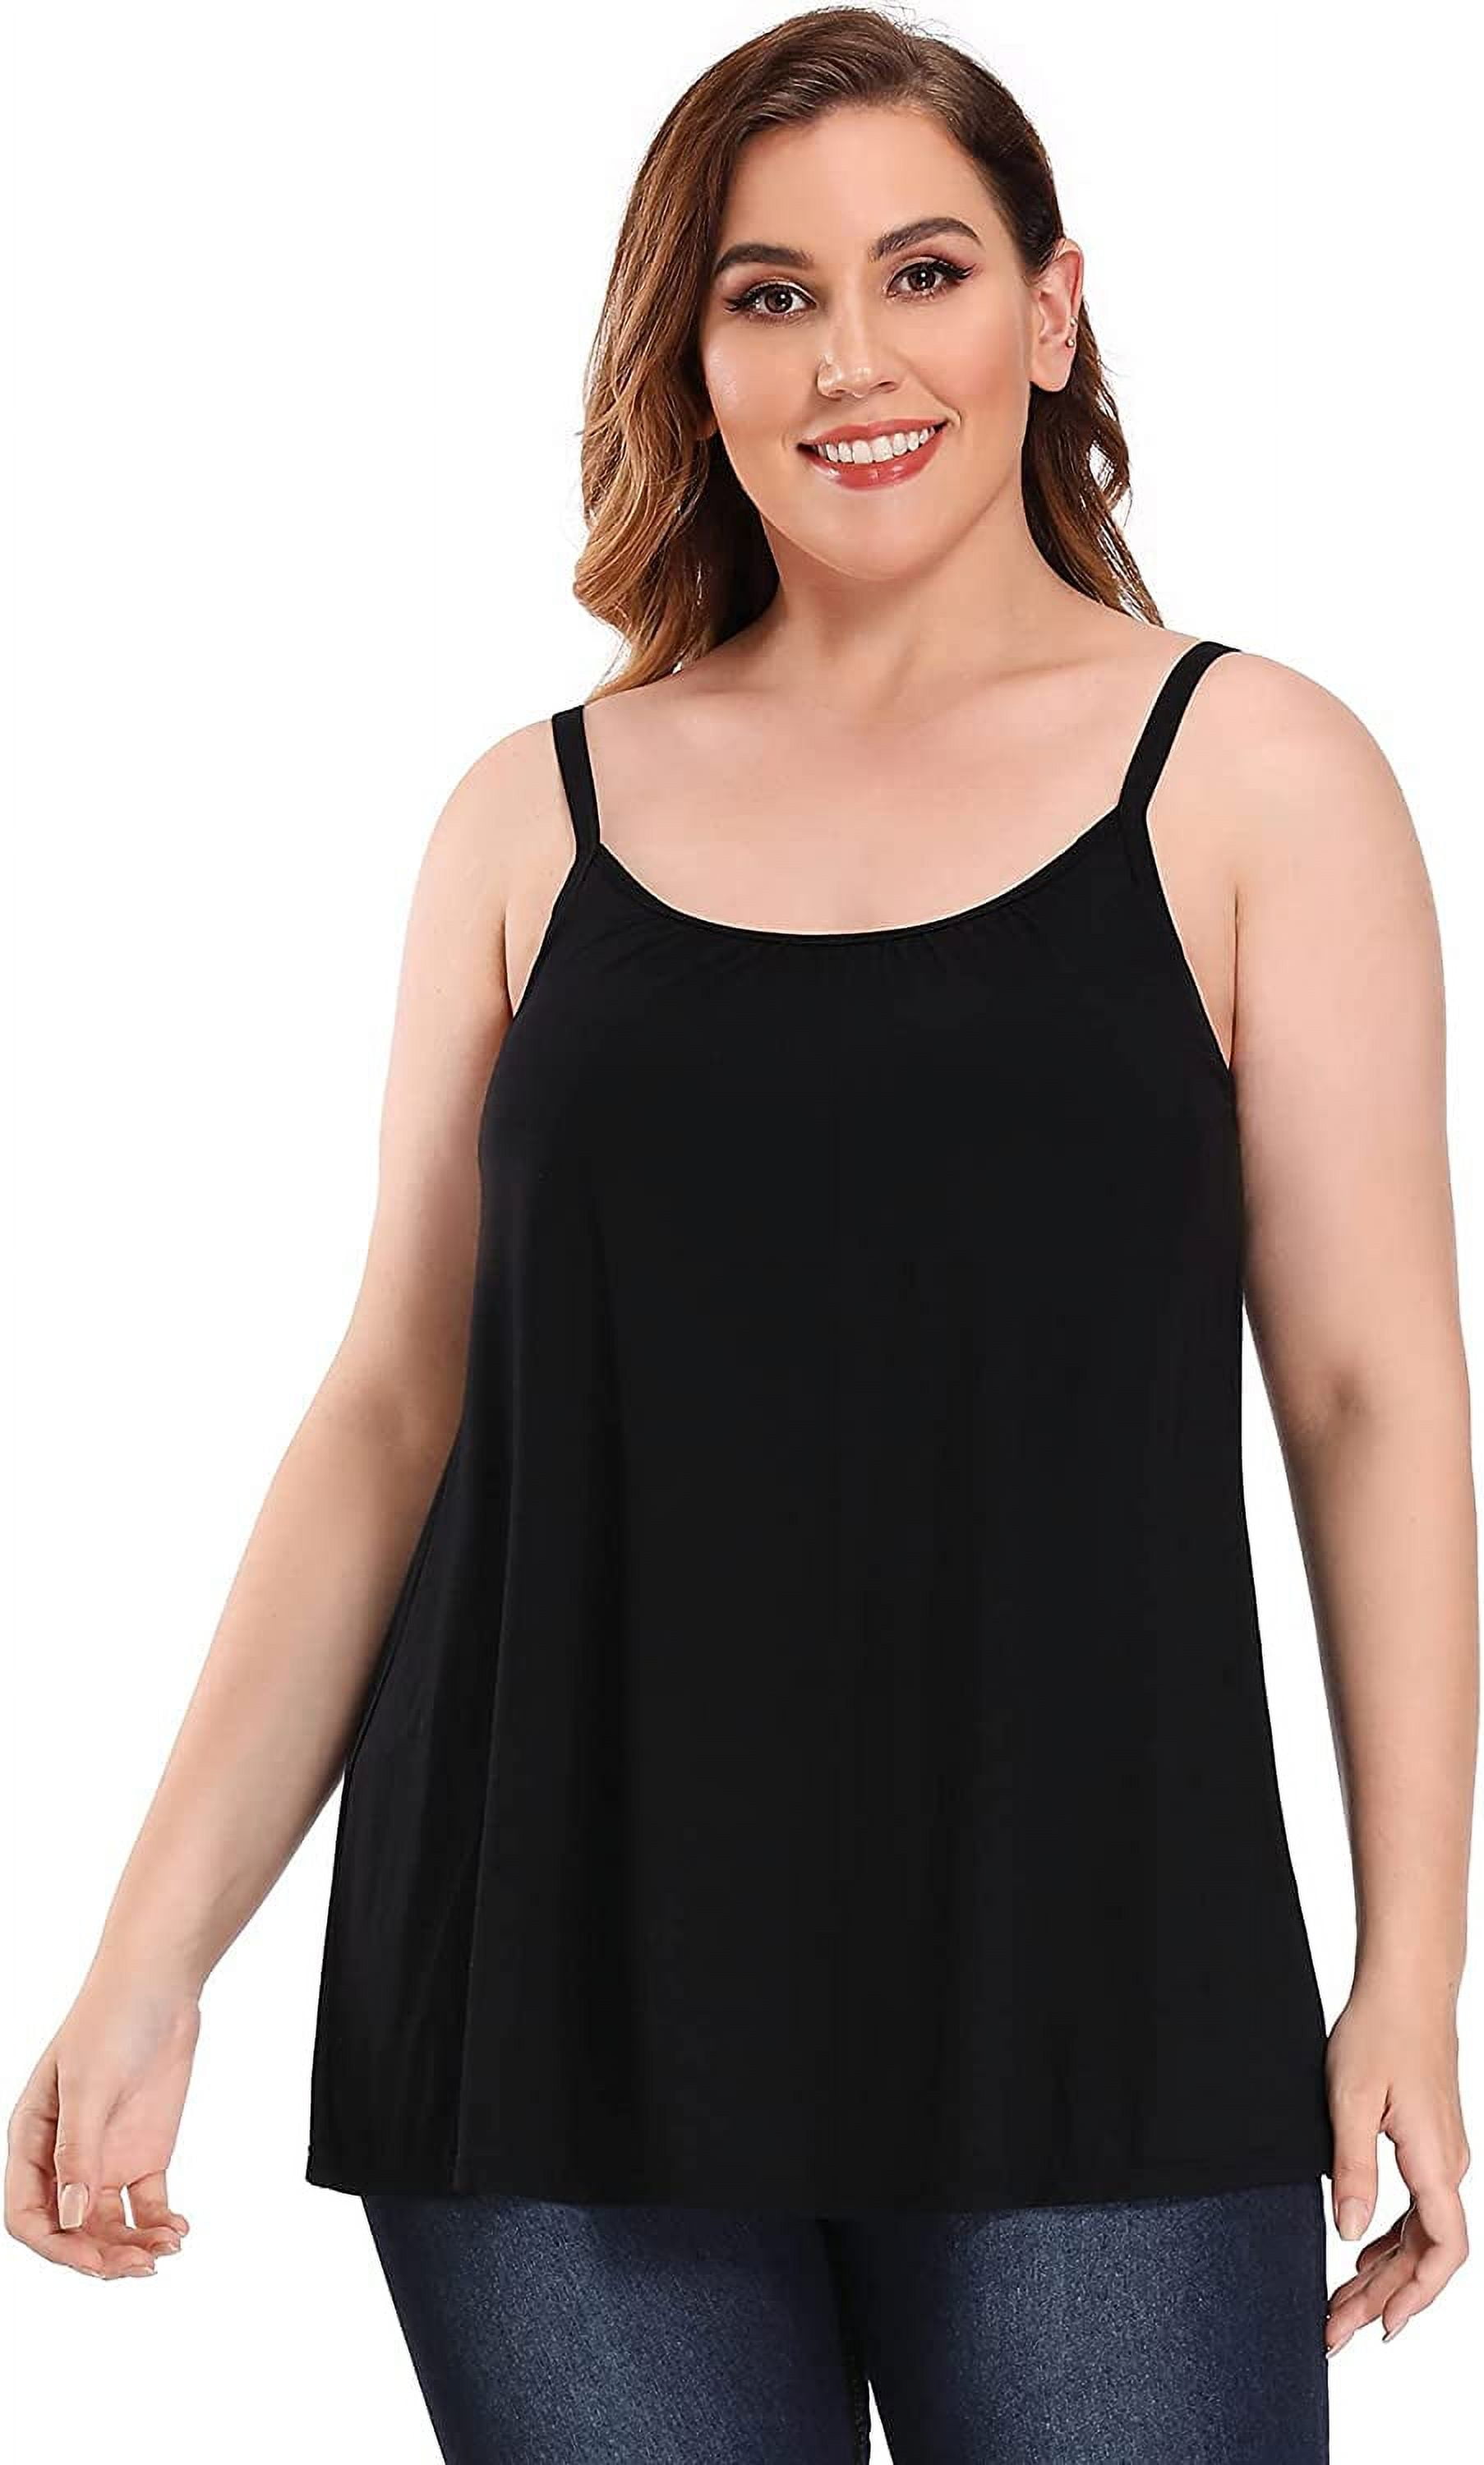 Women's Tank Tops with Built-in Bra Adjustable Plus Size Padded